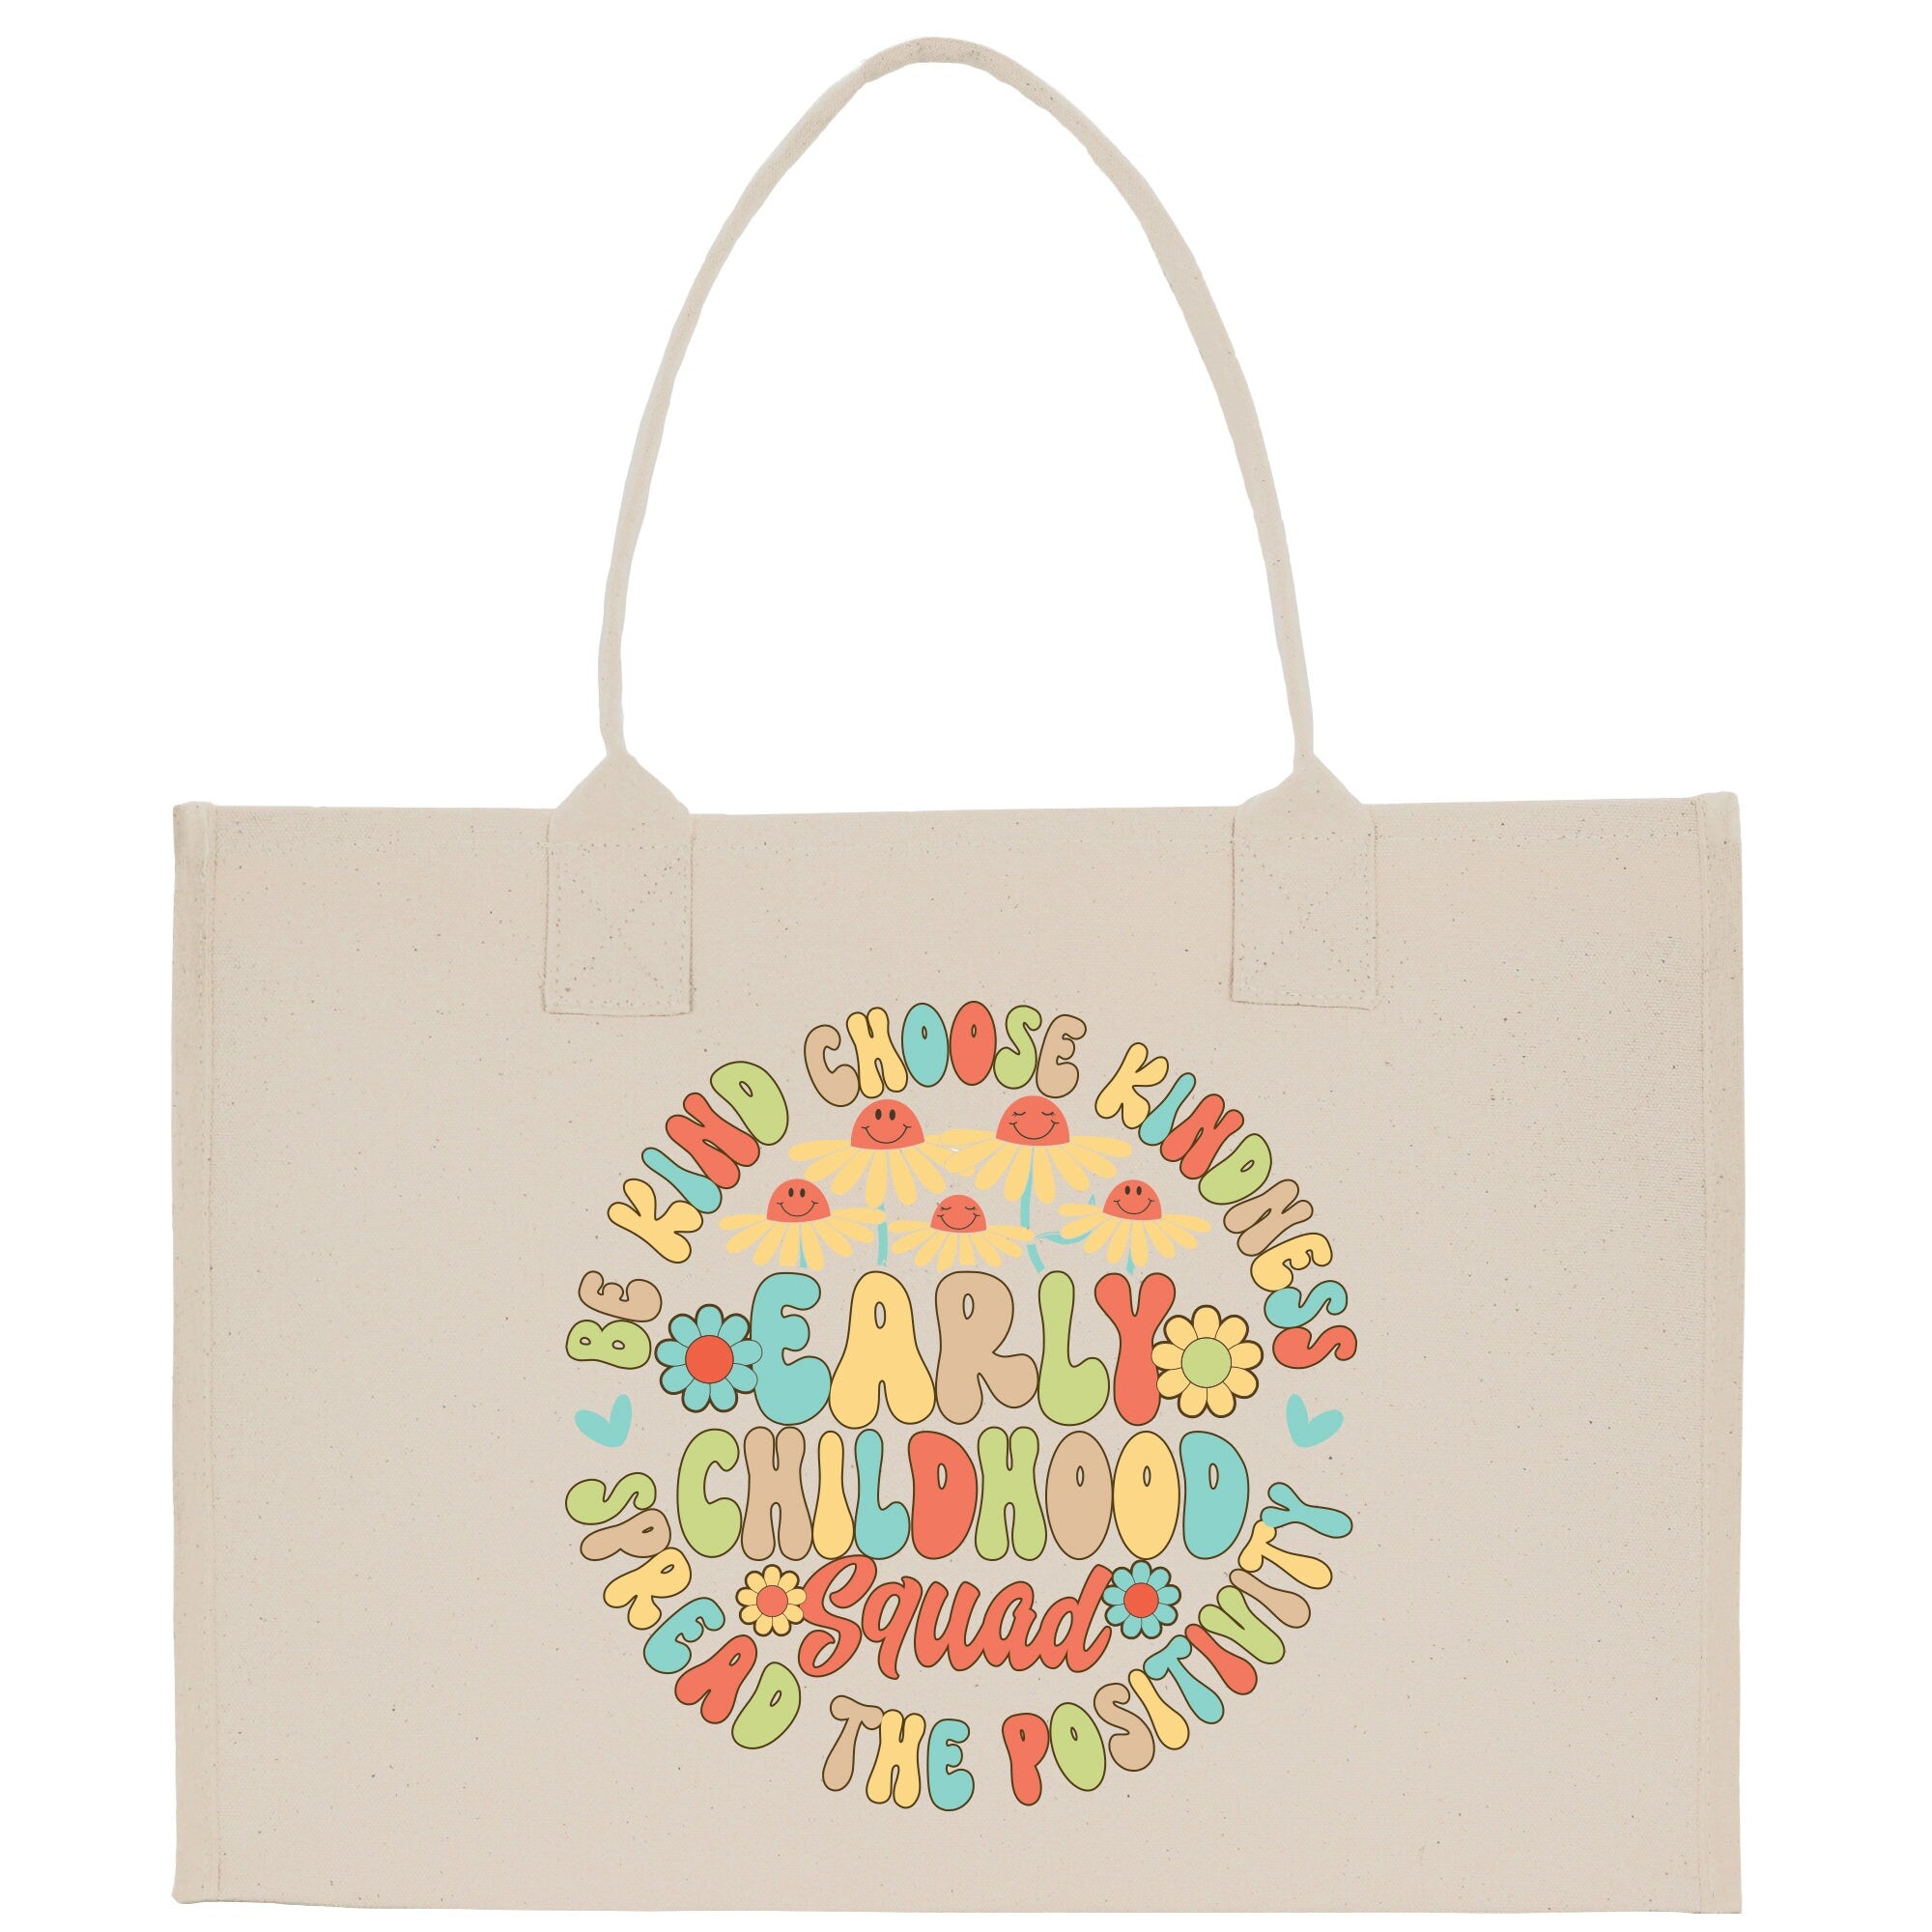 a white bag with a colorful design on it